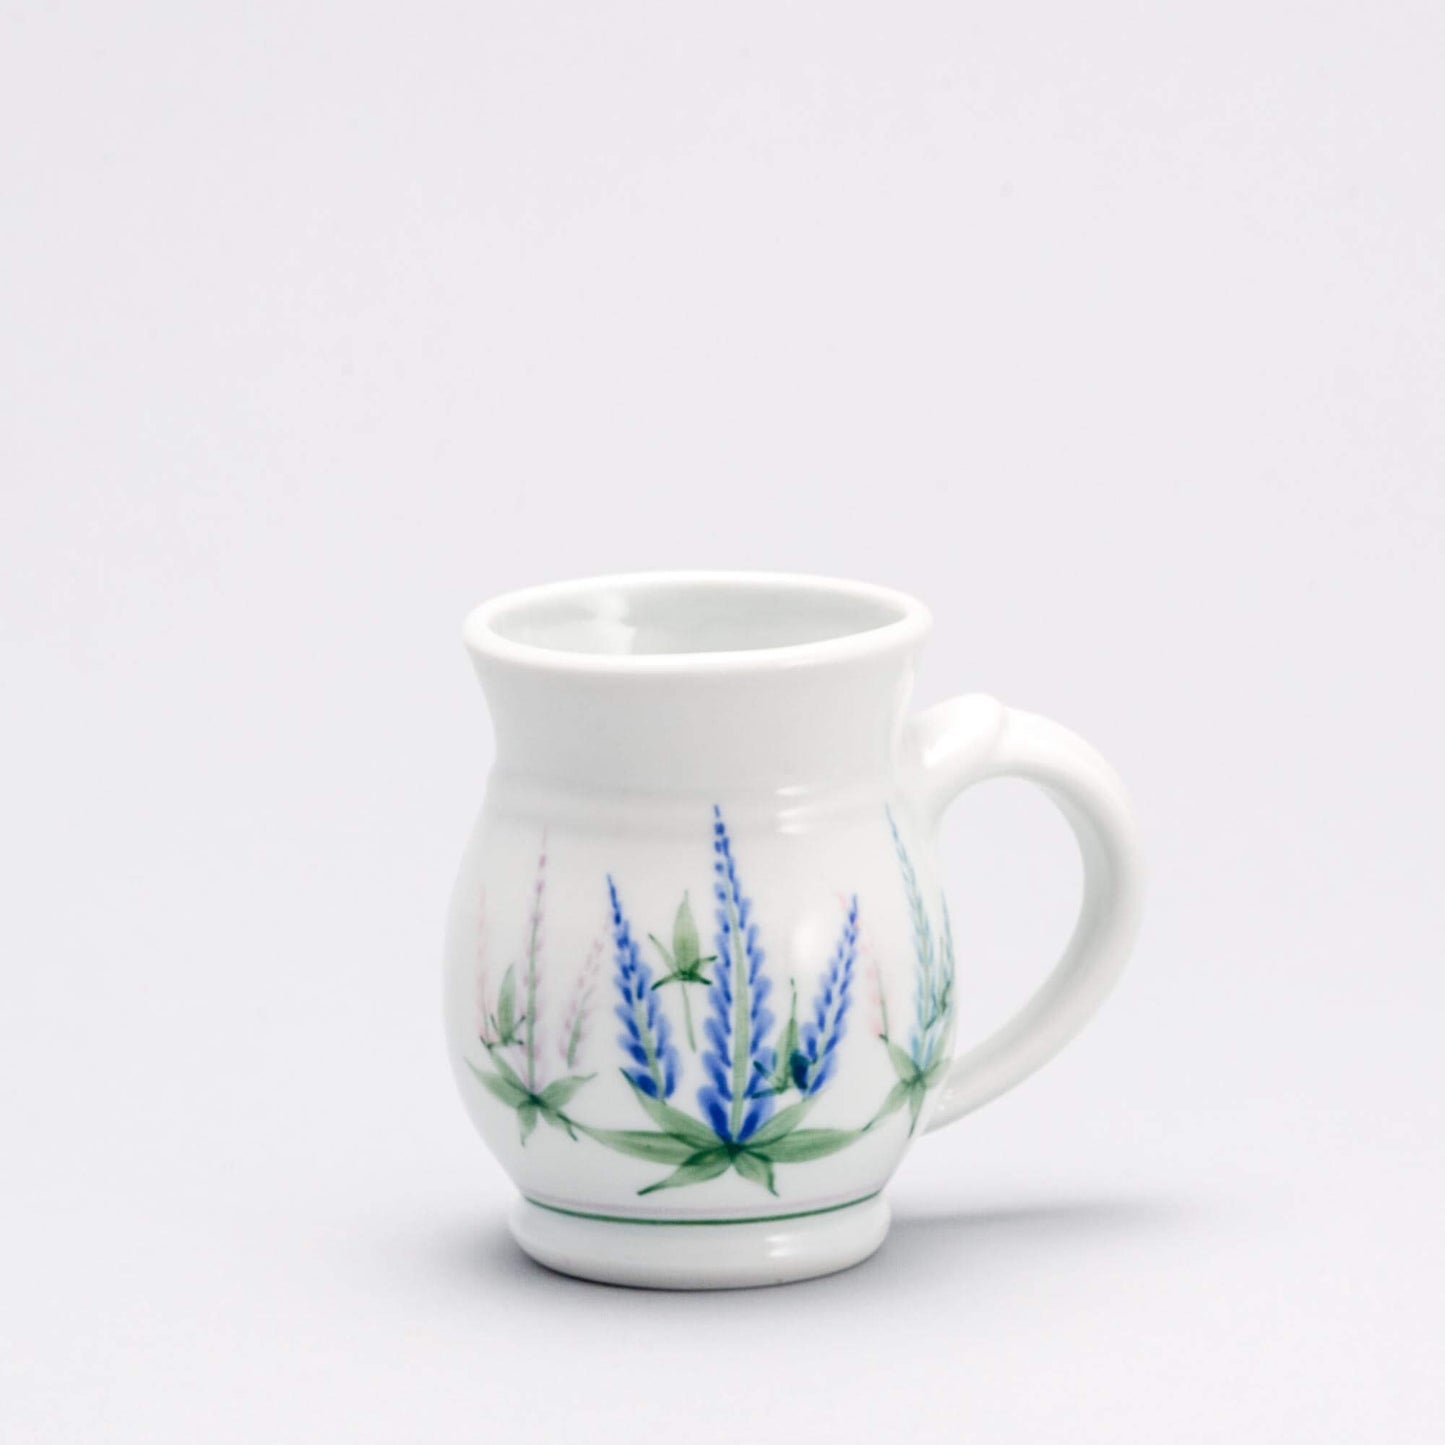 Handmade Pottery Curvy Mug made by Georgetown Pottery in Maine Lupine